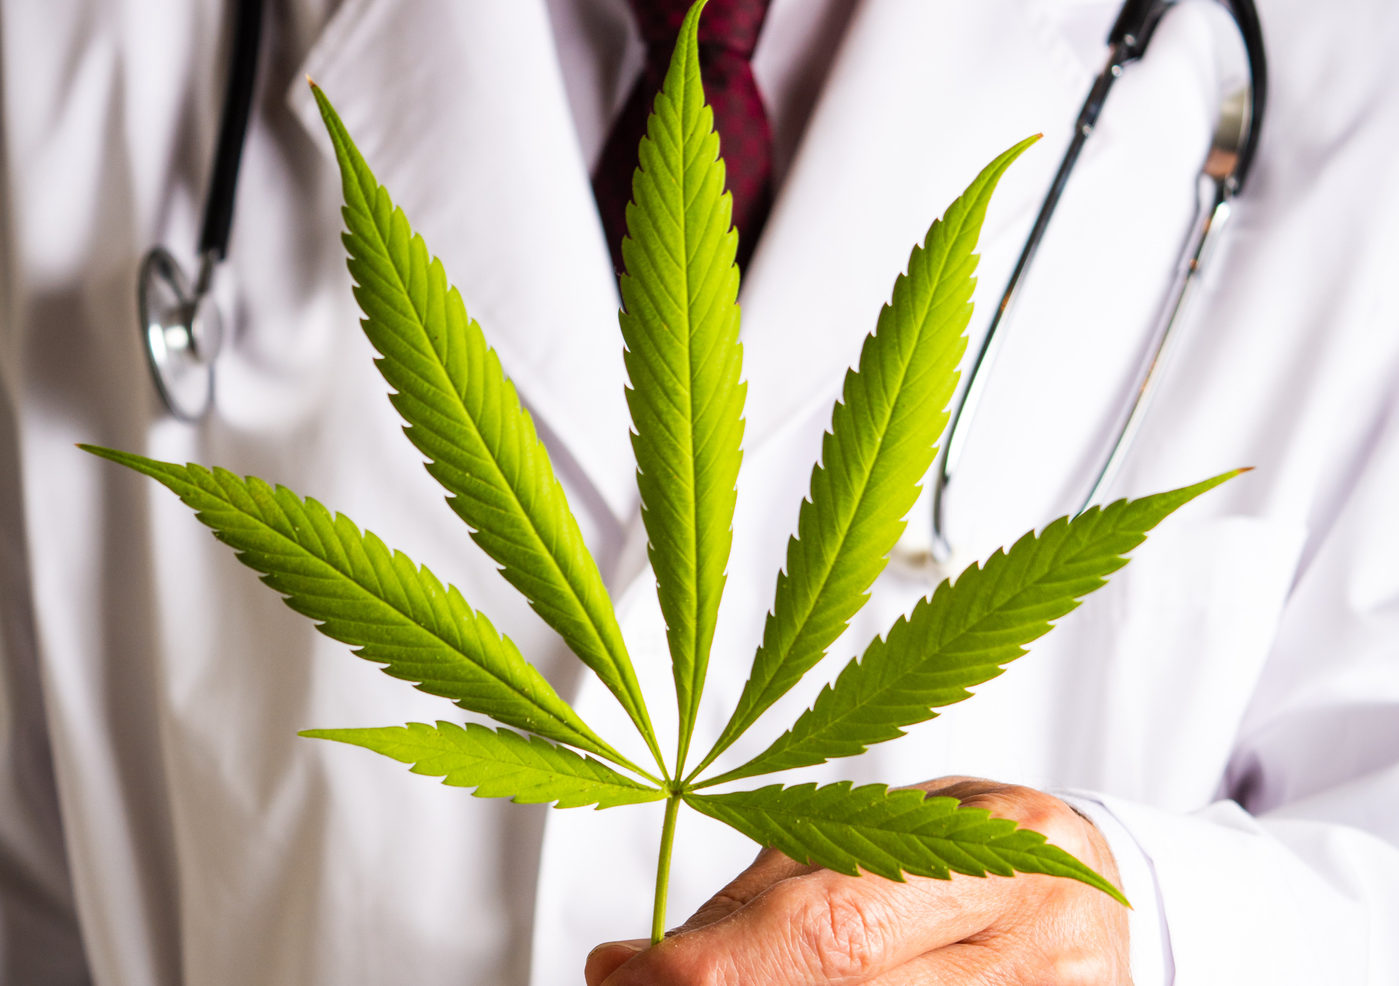 Doctors are prescribing CBD for an increasing number of issues